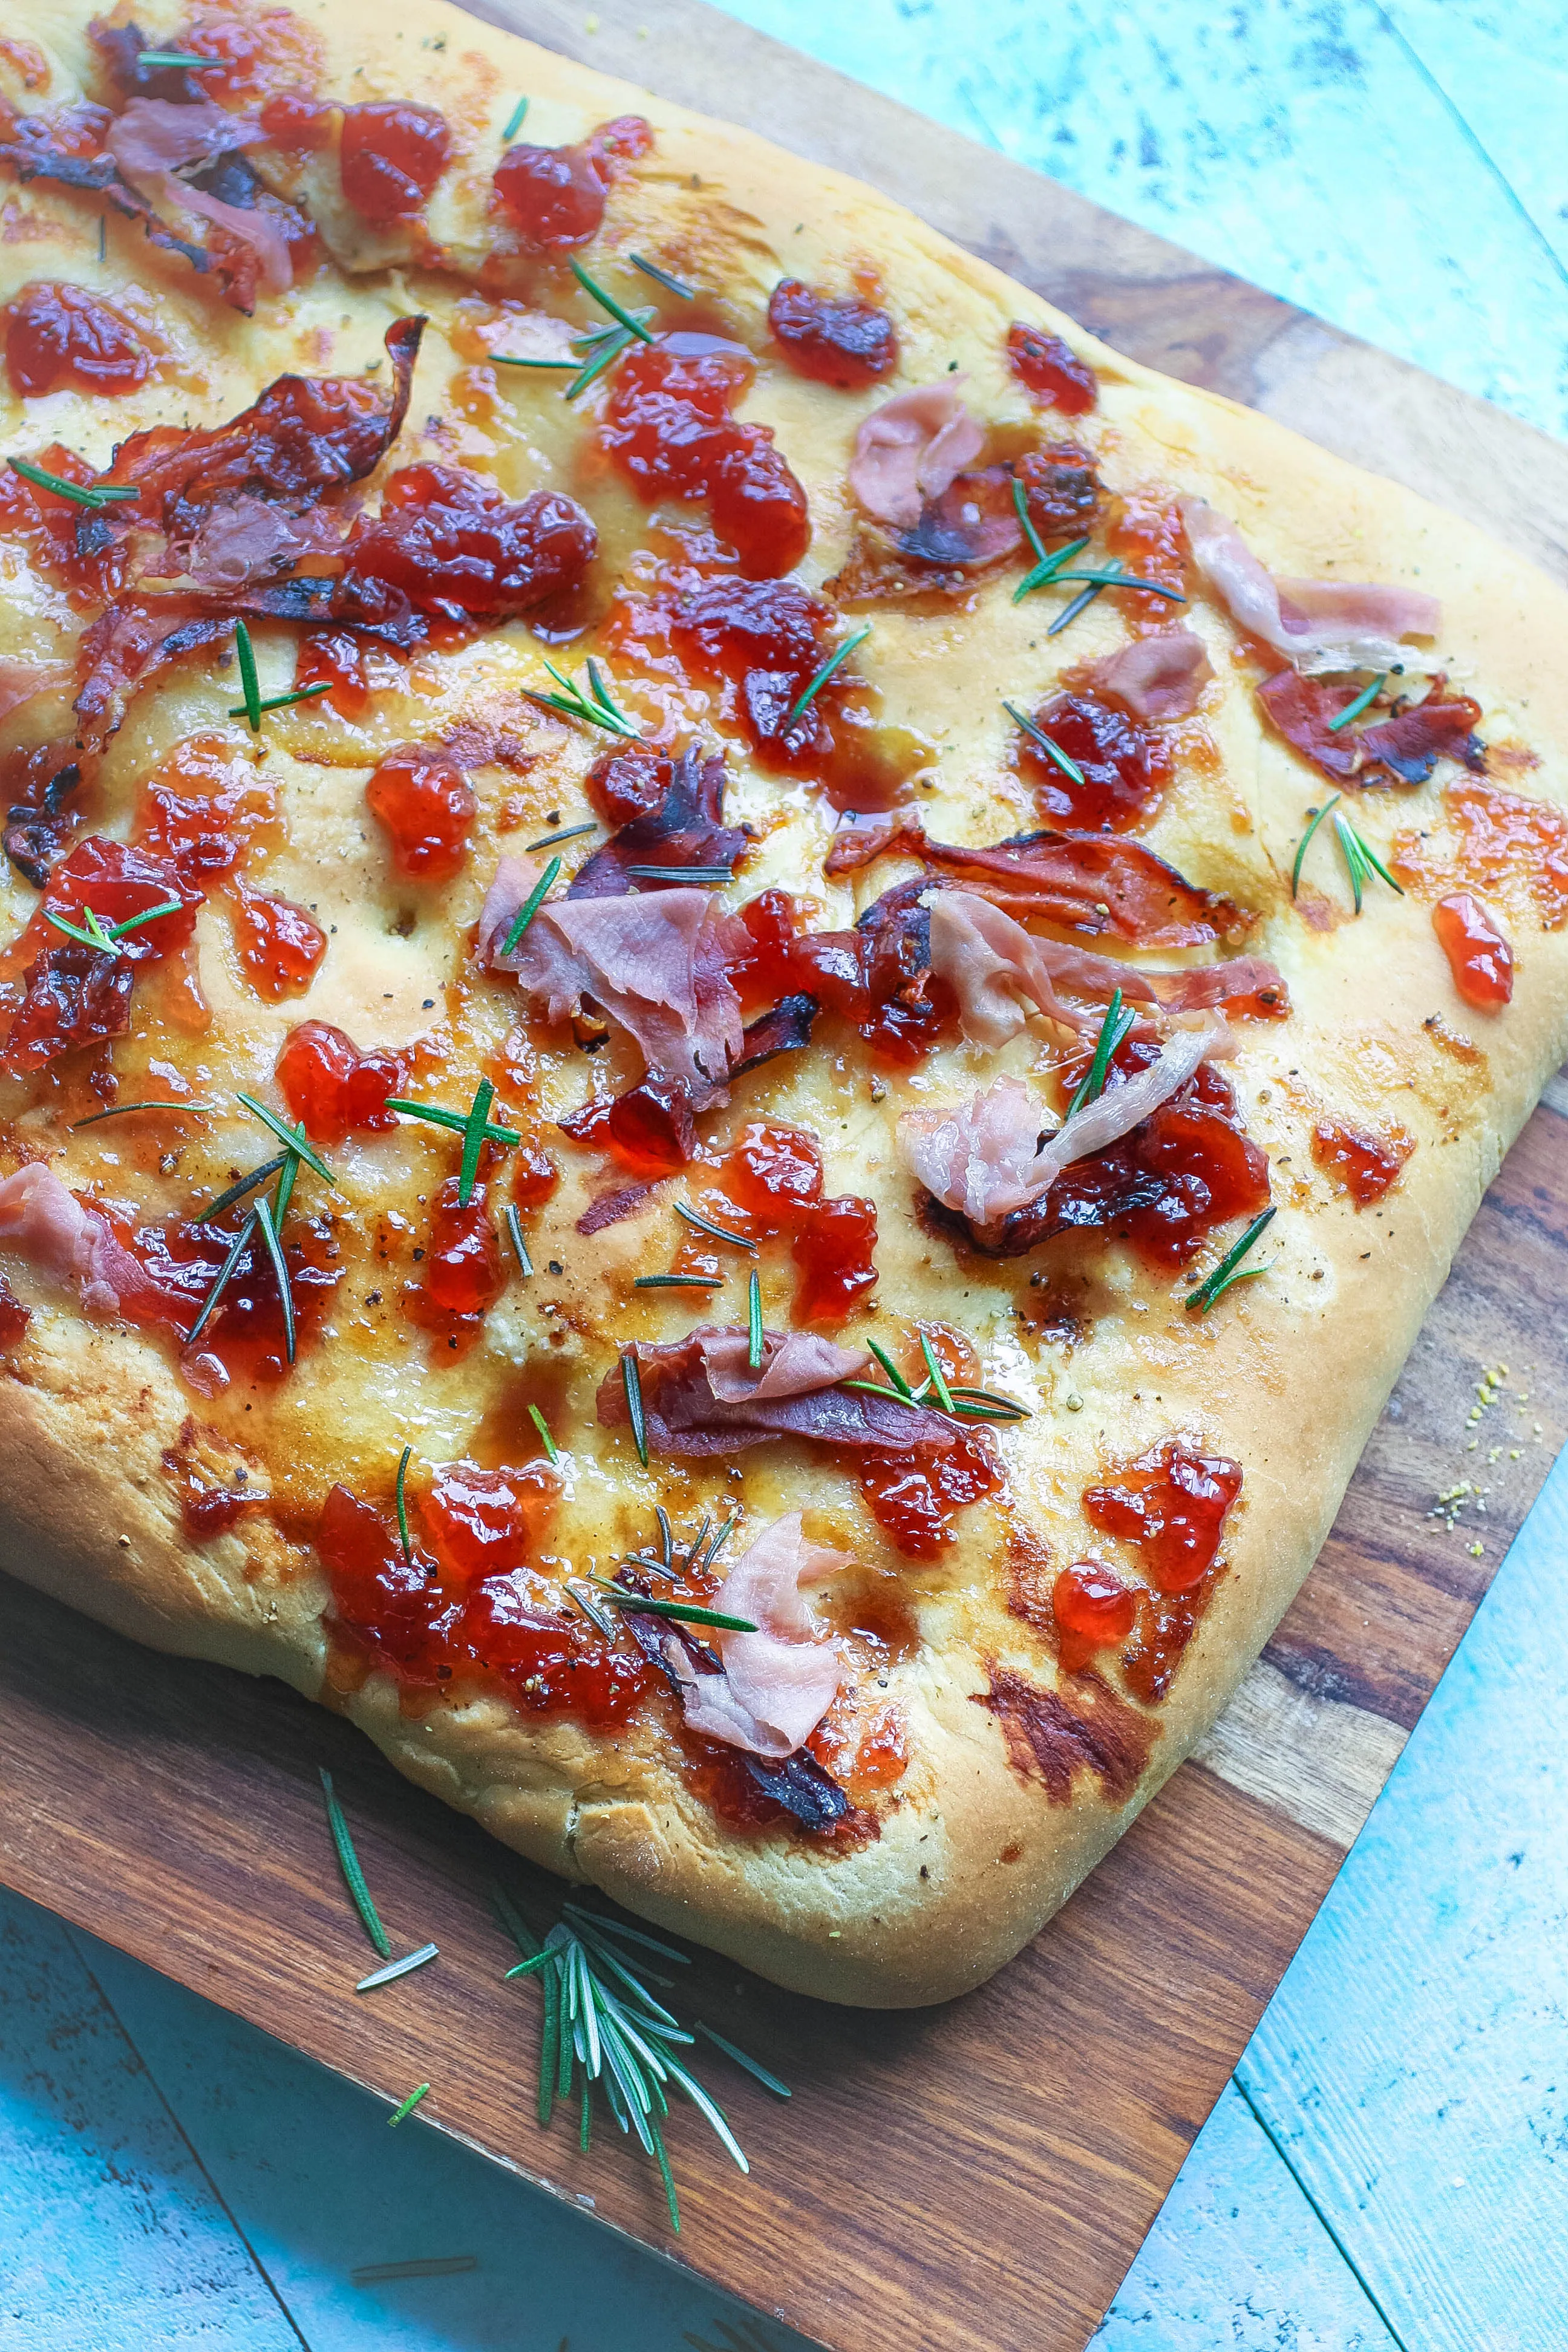 Cherry-Prosciutto Focaccia is a lovely bread that's as filling as pizza. Cherry-Prosciutto Focaccia is so flavorful and easy to make, too.